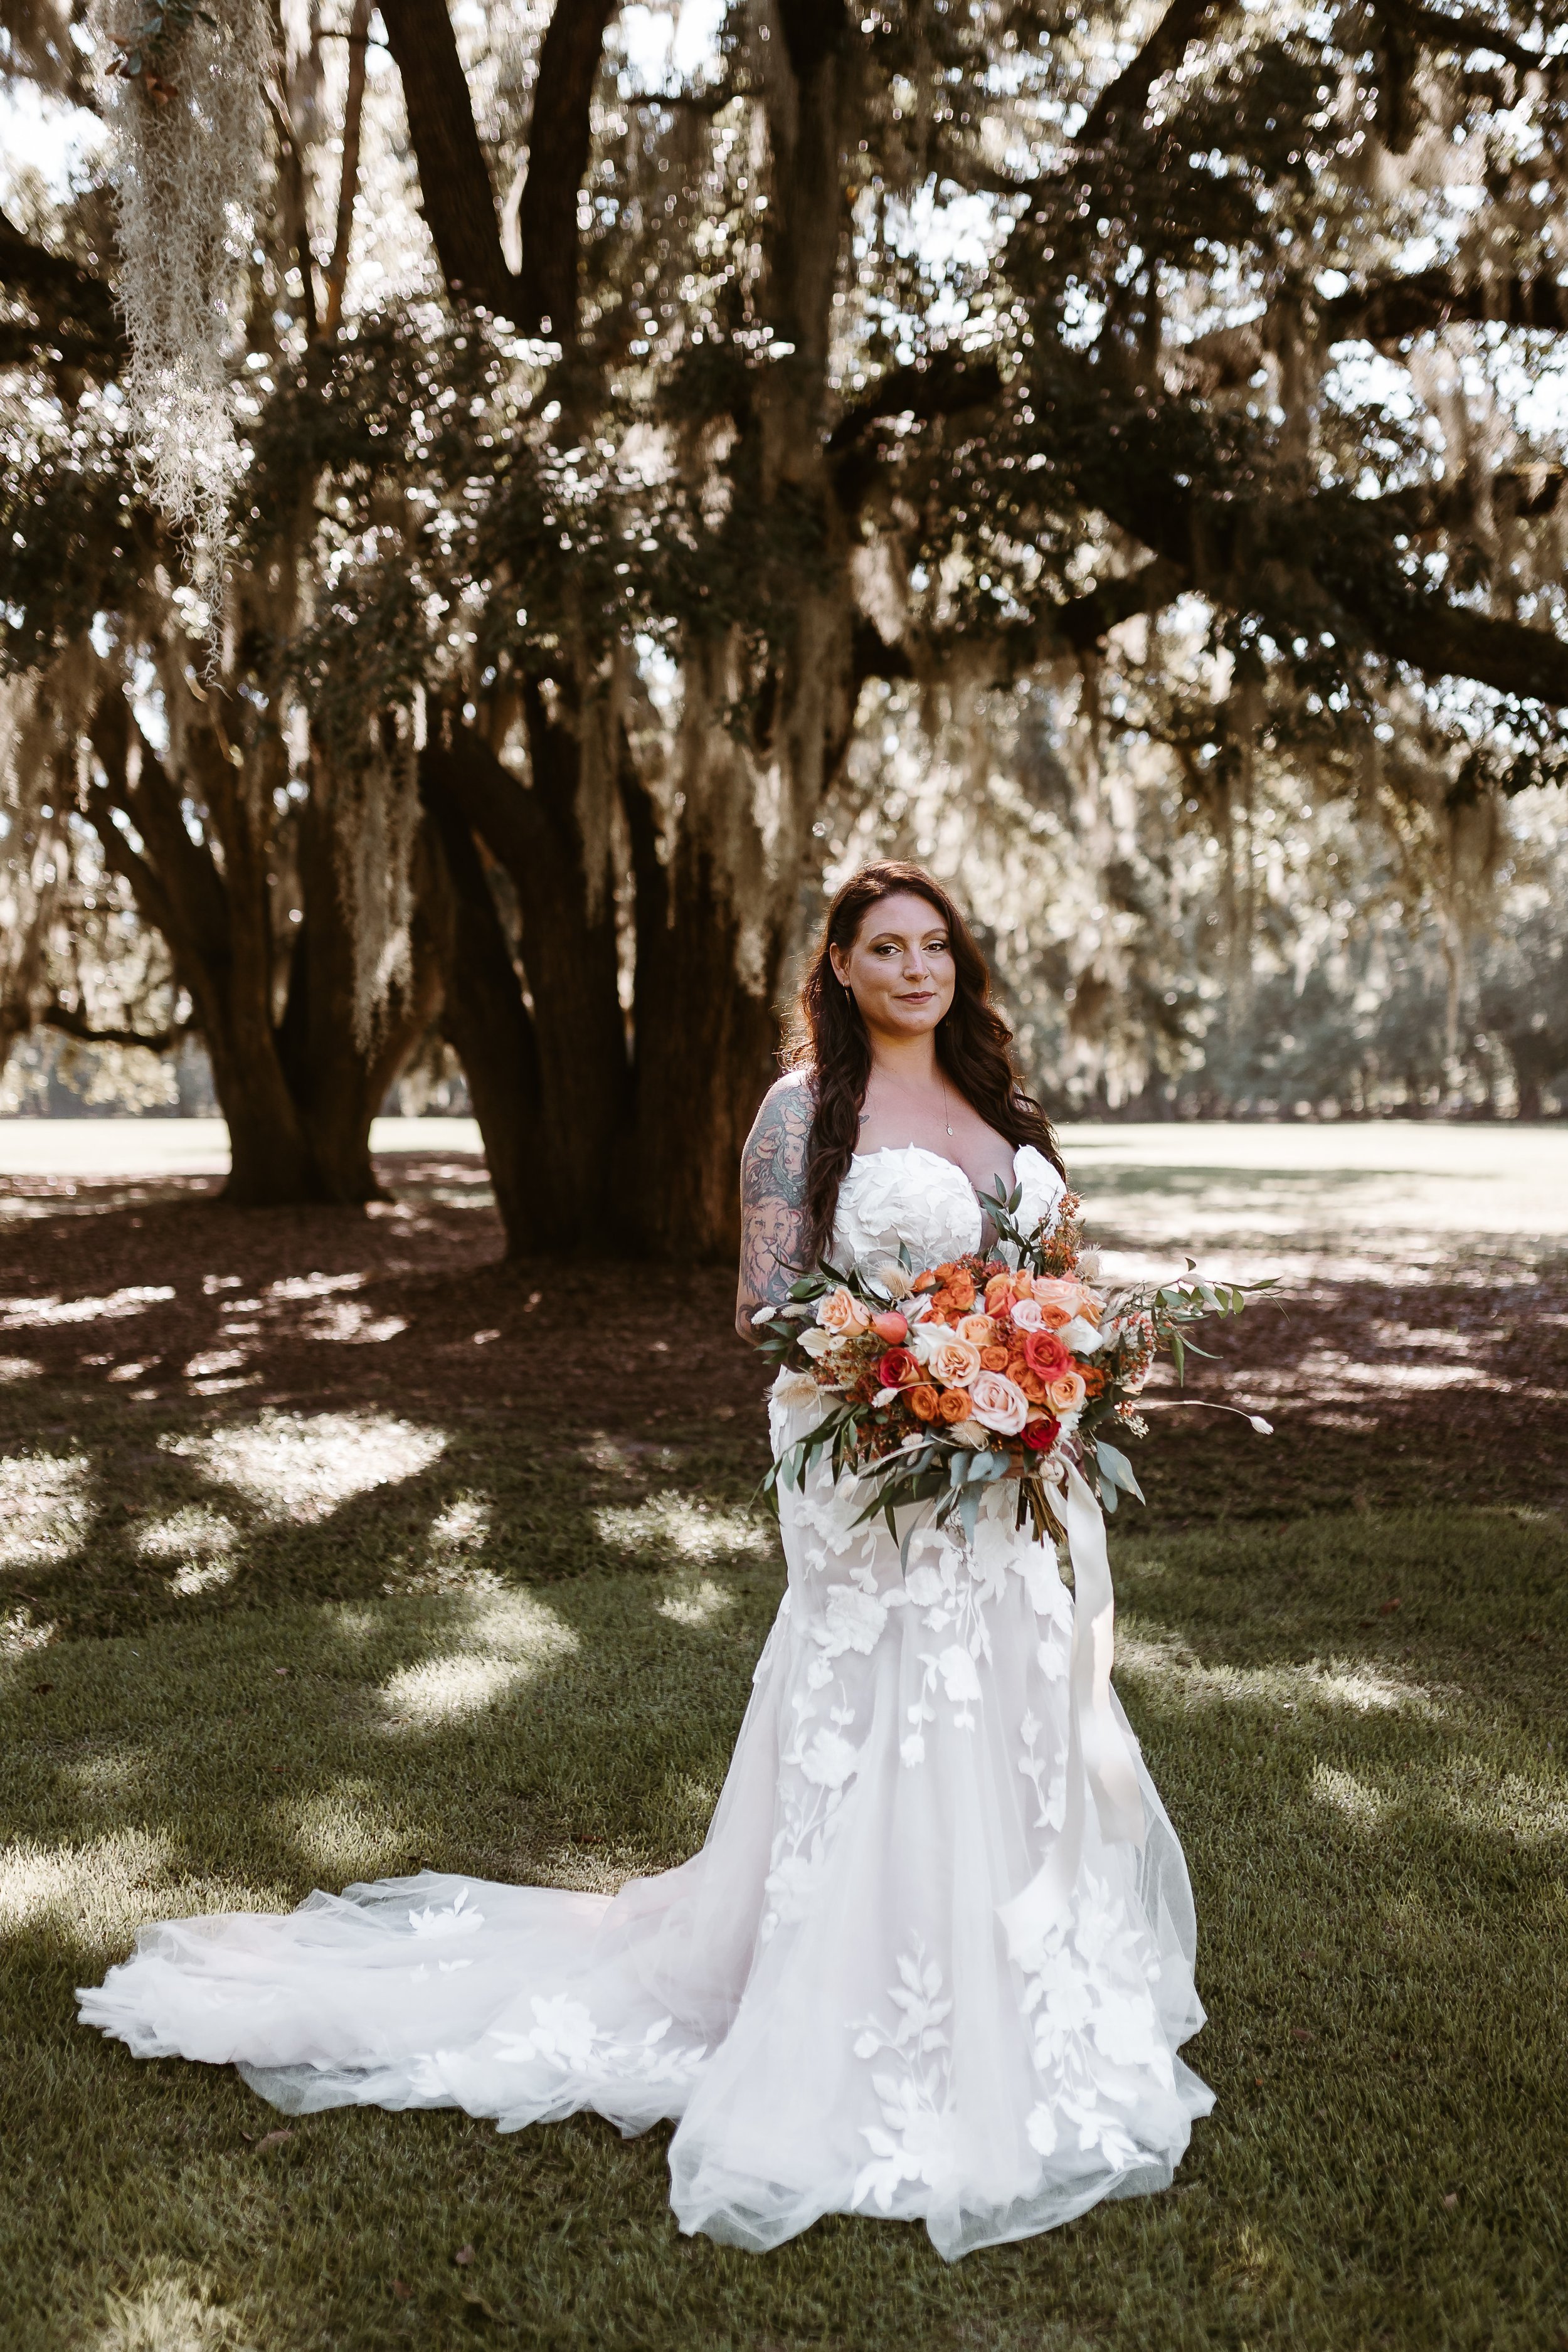 ivory-and-beau-blog-down-for-the-gown-real-bride-rebecca-ingram-wedding-dress-maggie-sottero-bridal-gown-strapless-wedding-dress-wedding-gown-savannah-bridal-shop-savannah-bridal-boutique-savannah-georgia-Annie & Cam Wedding-265.jpg